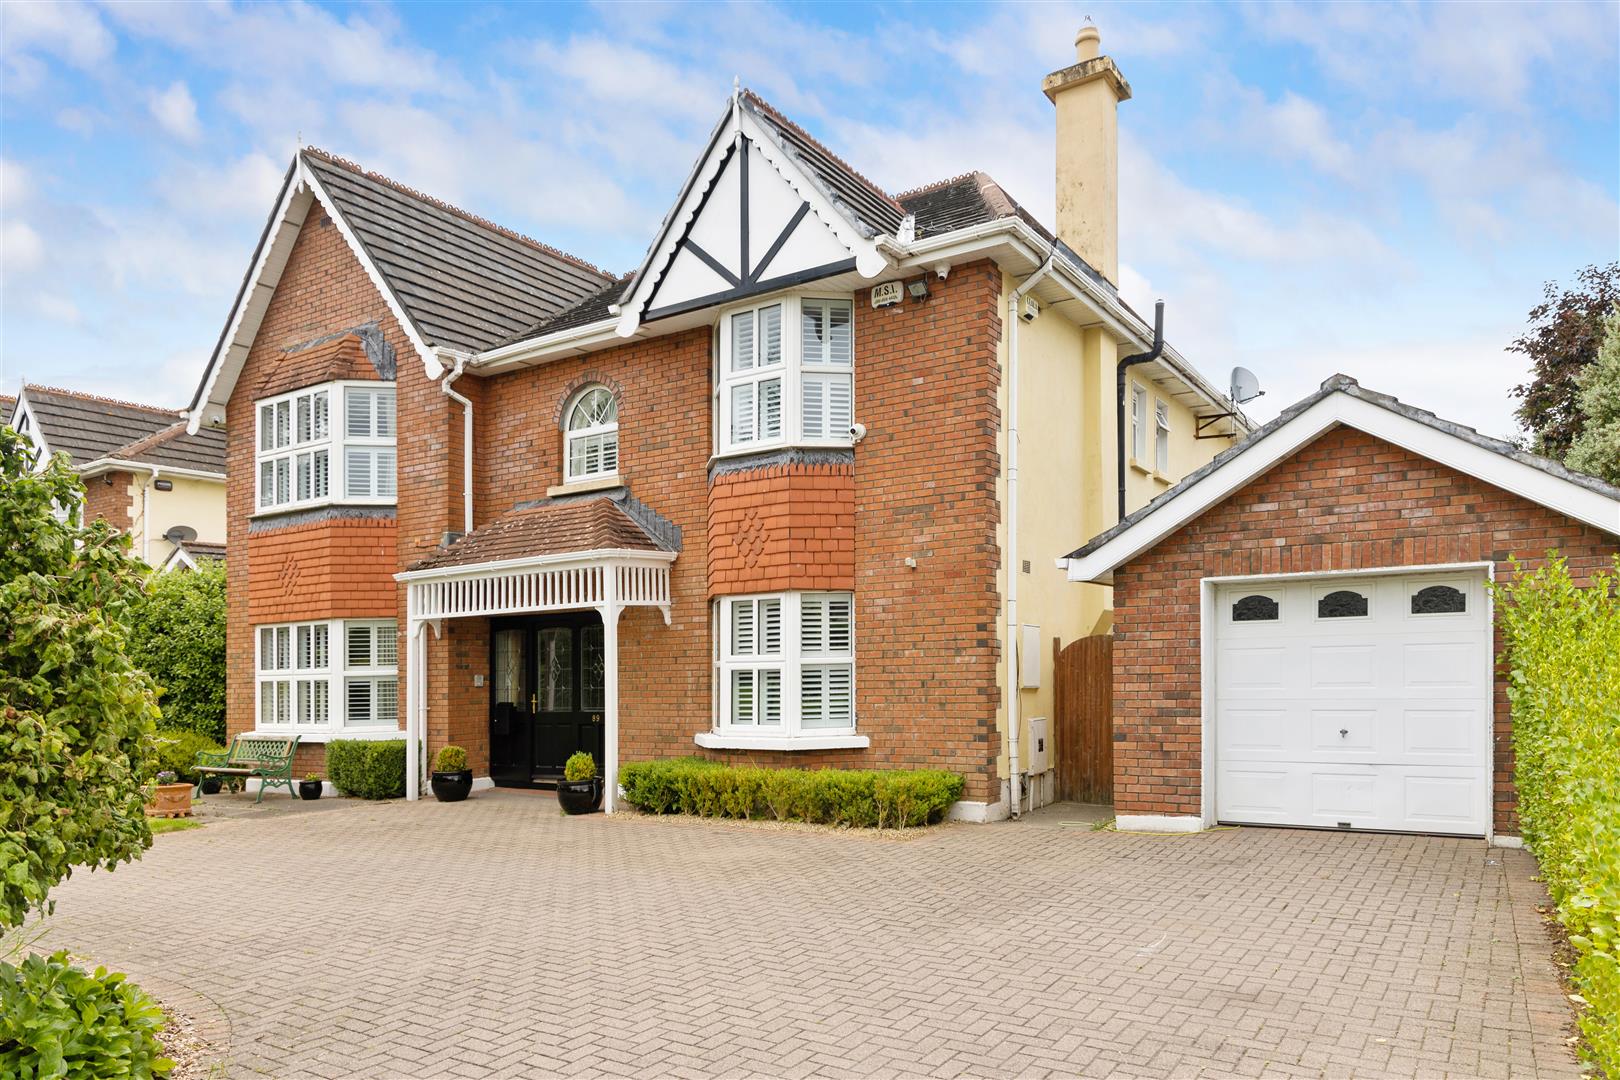 89 Eagle Valley, Enniskerry, Co Wicklow